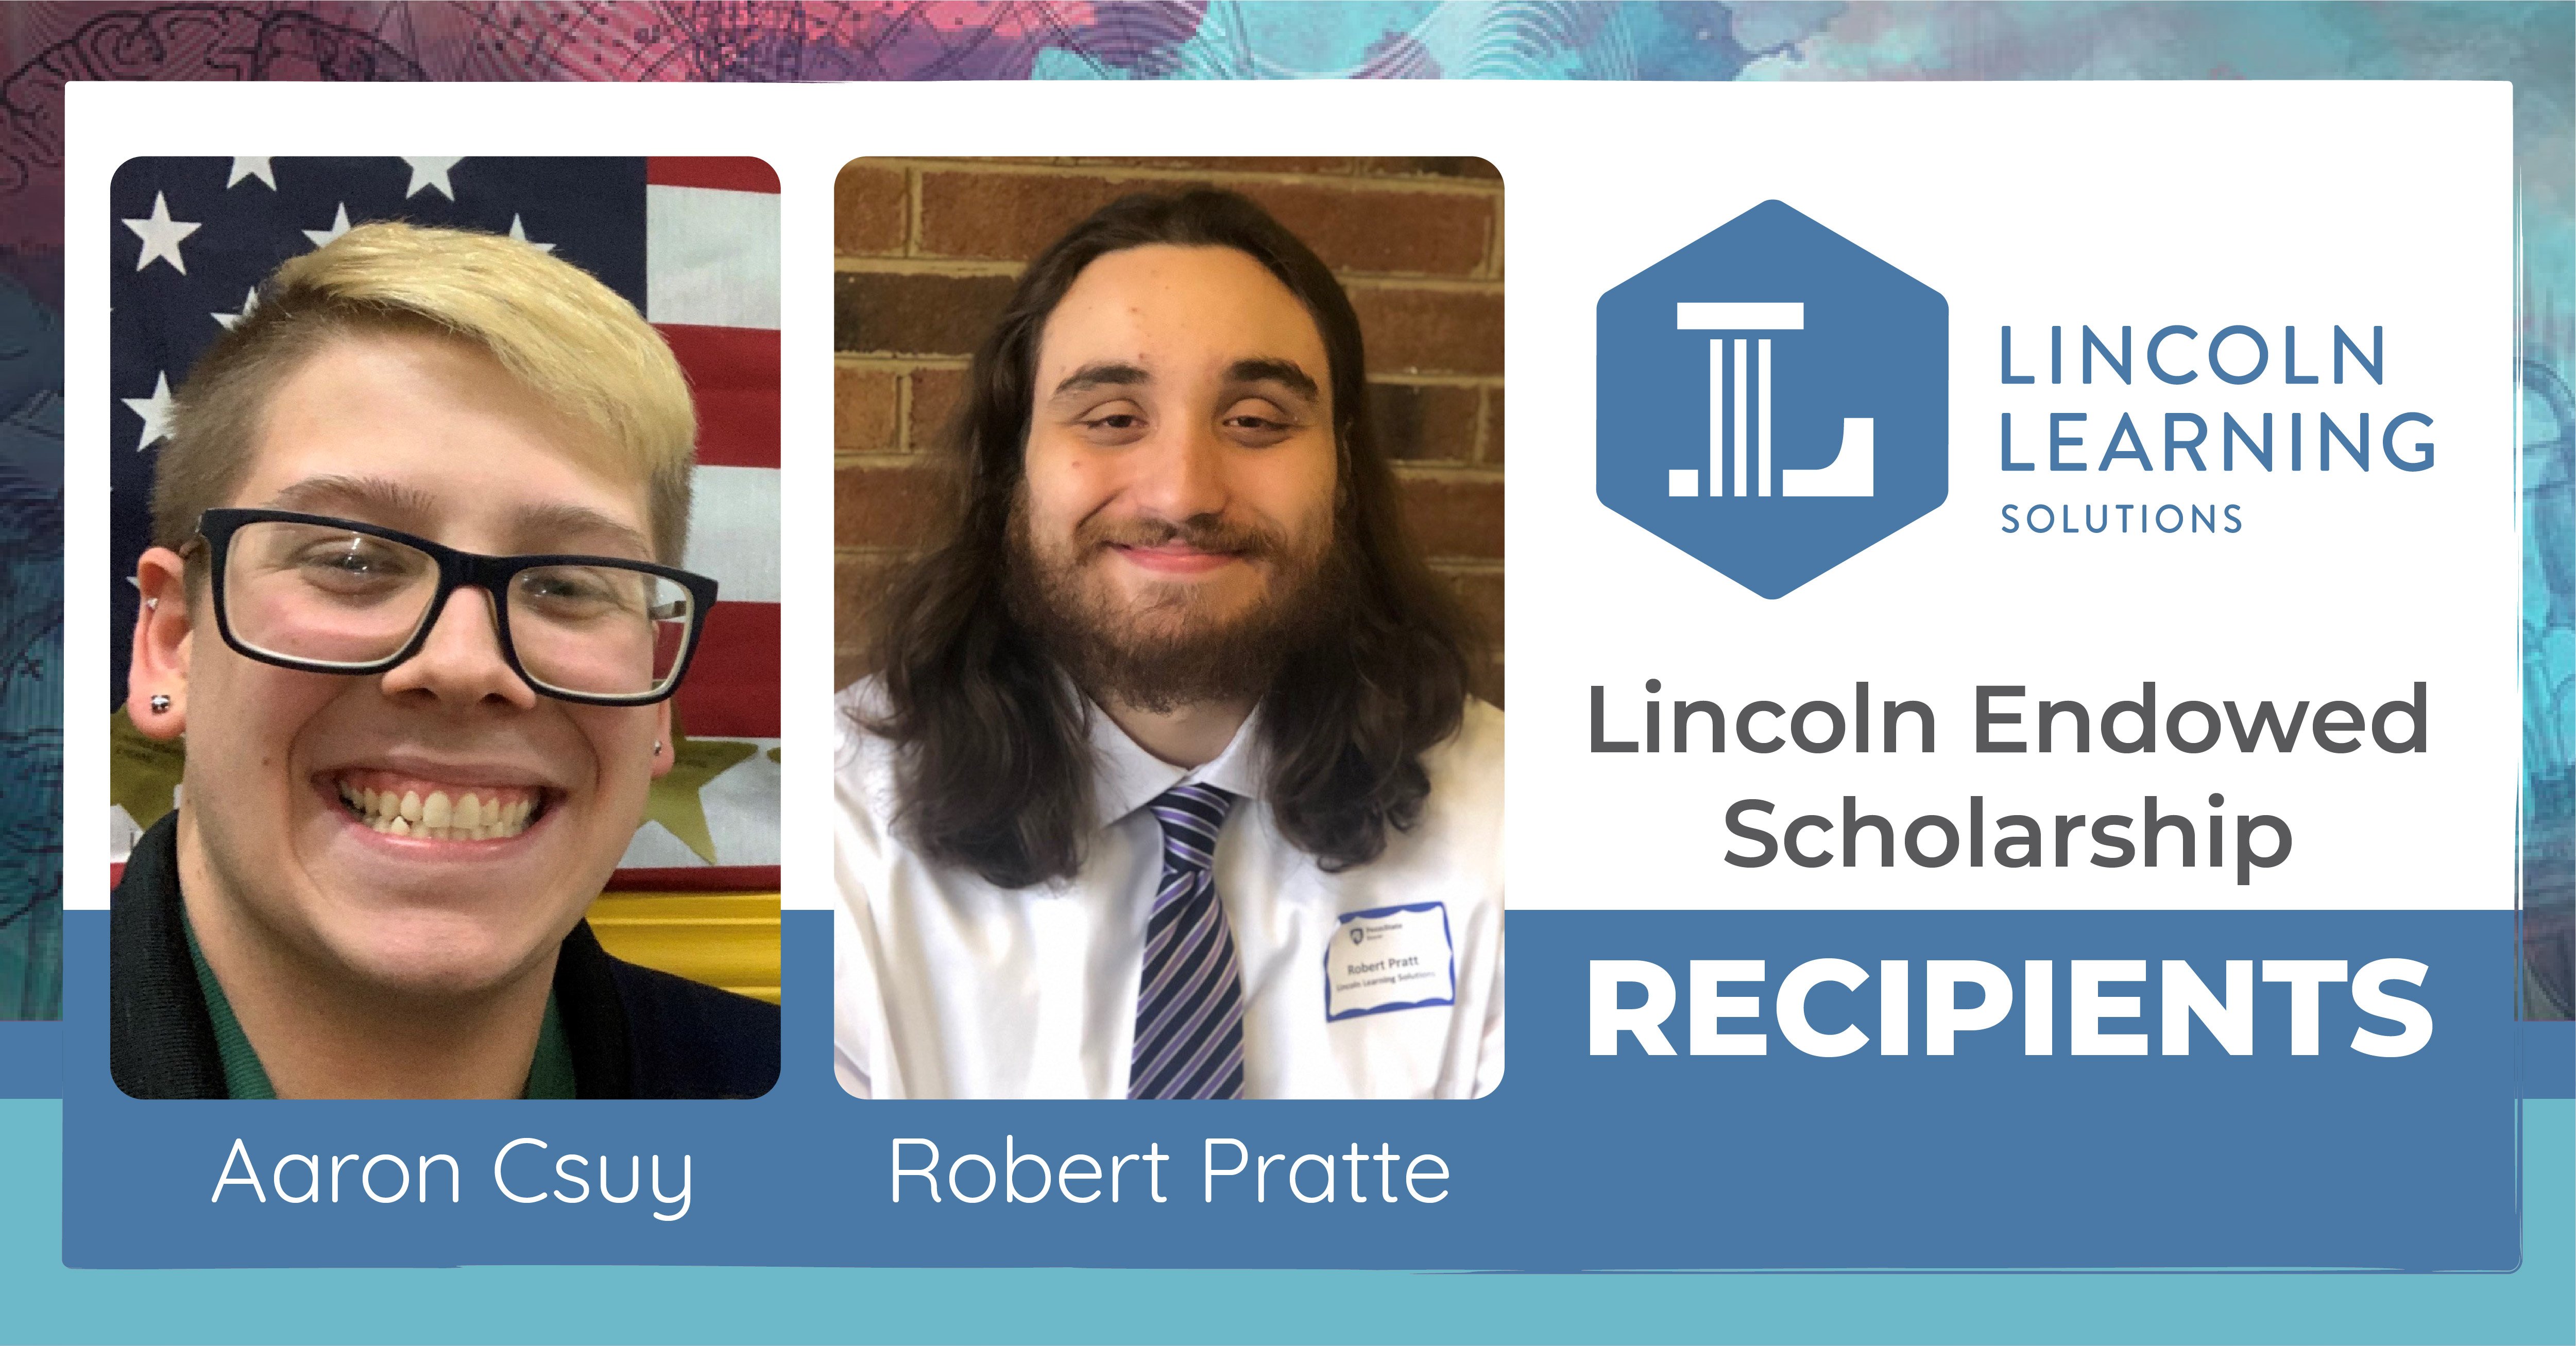 Penn State Lincoln Learning Solutions Endowed Scholarship Recipients